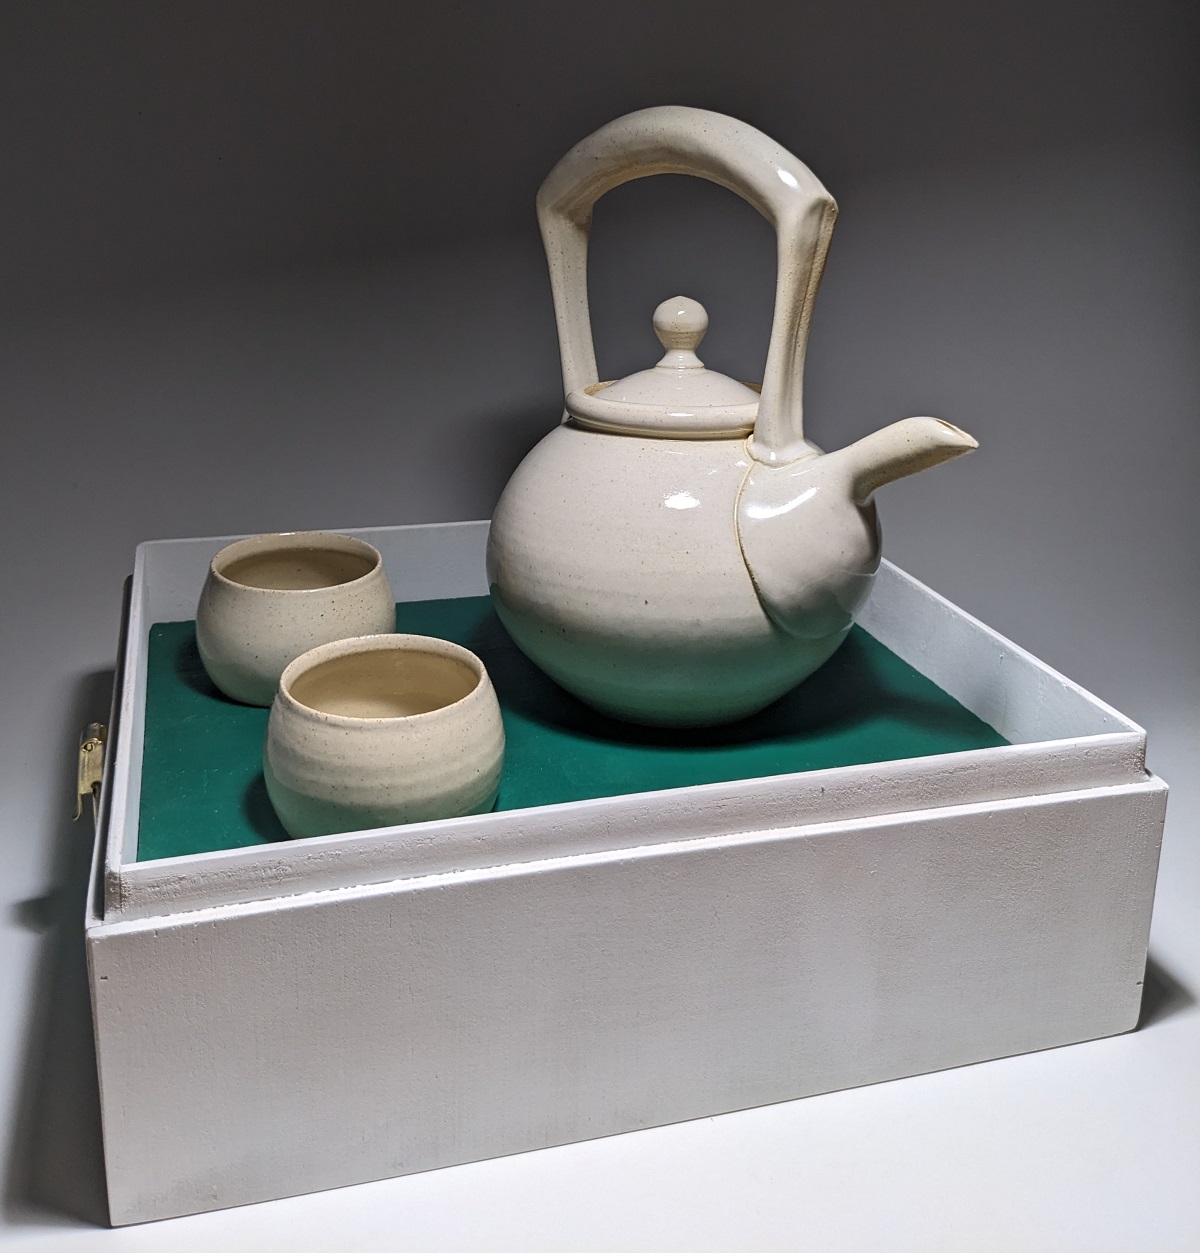 Off-white teapot with matching cup sitting in a white box with a green interior.